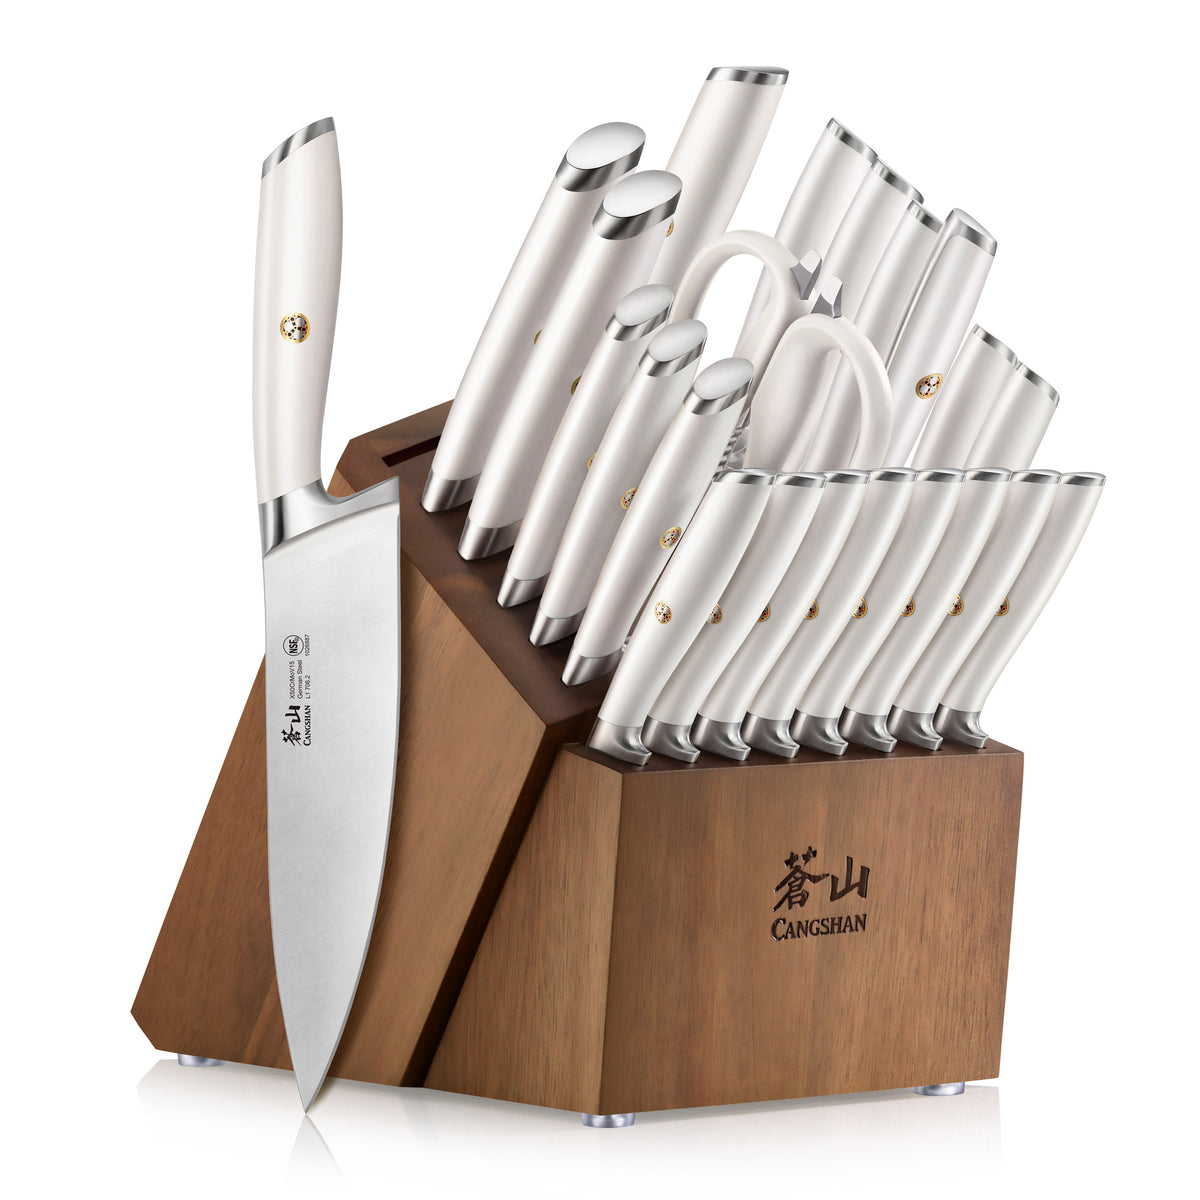 8-Piece Knife Block Set White | Gladiator Series | Knives NSF Certified | Dalstrong